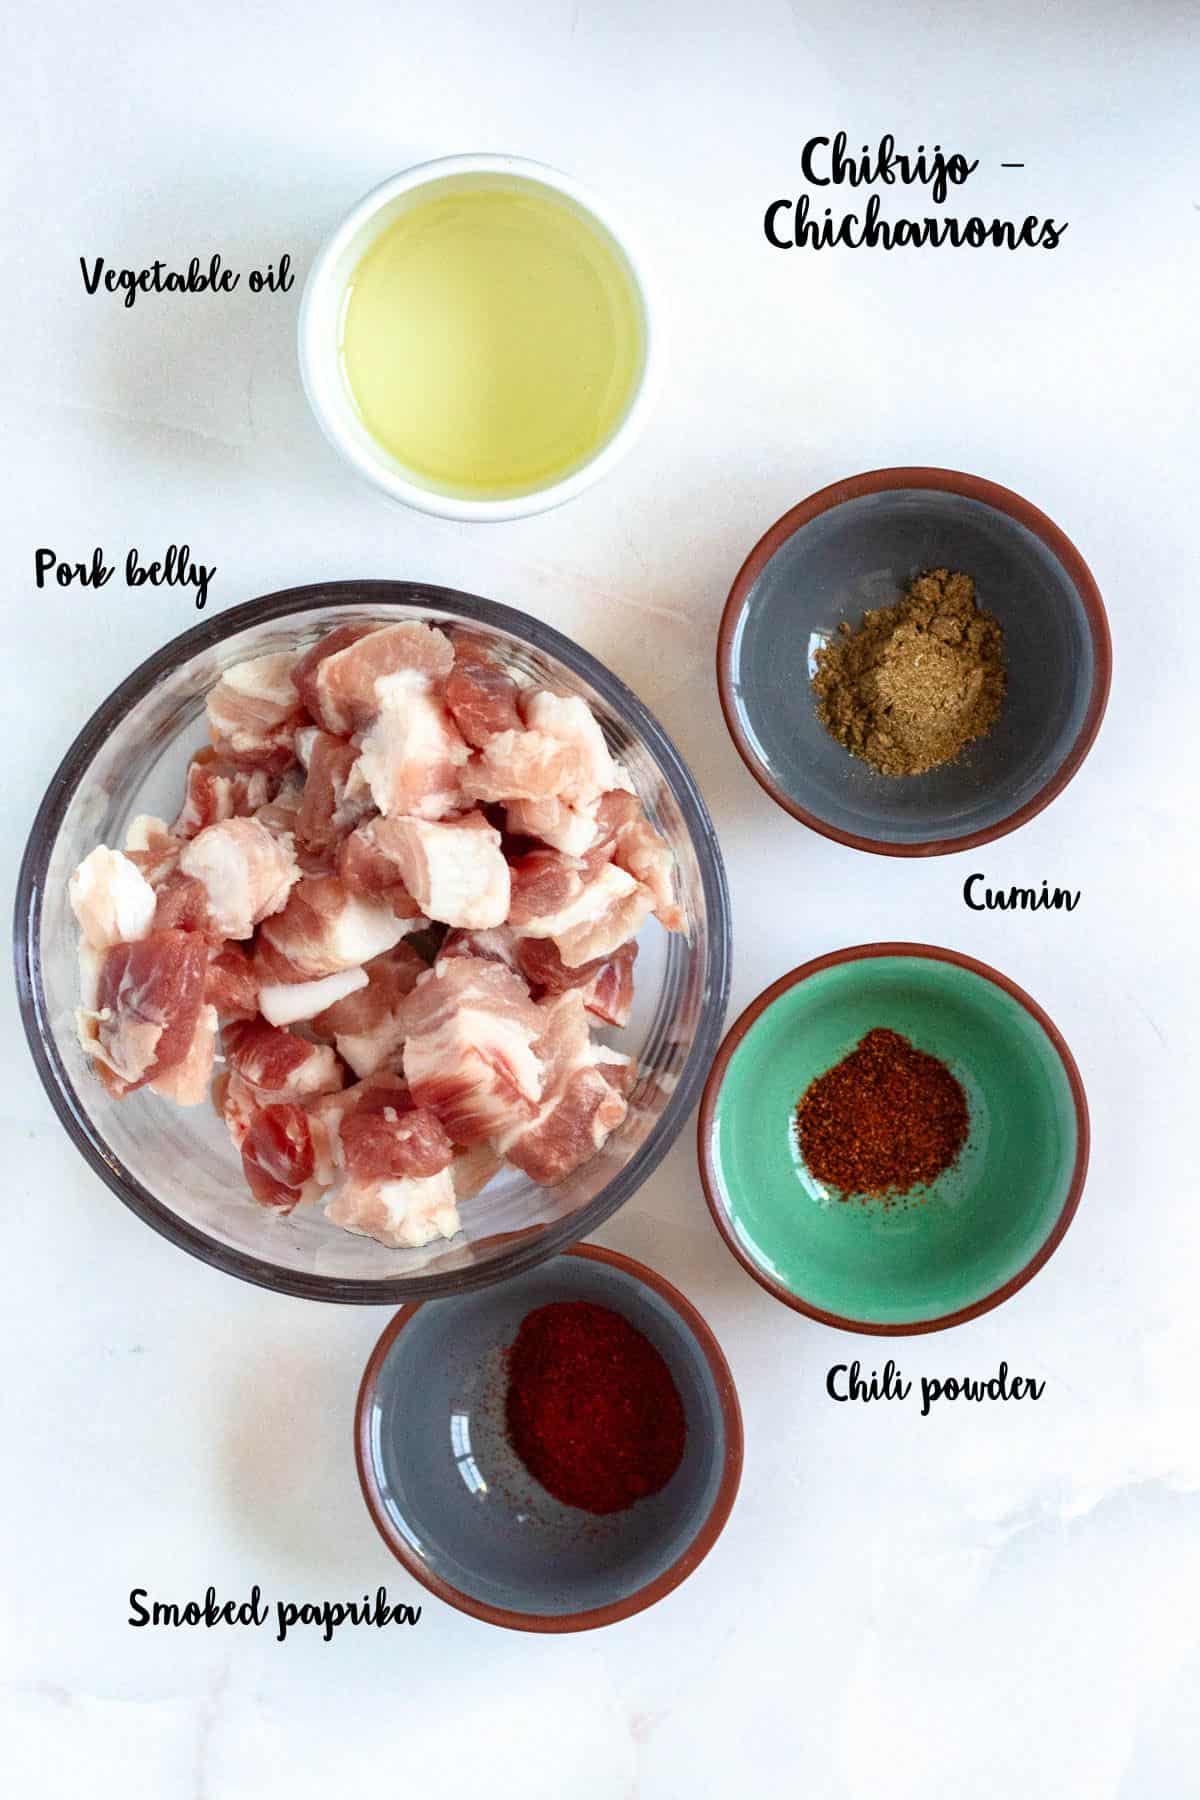 Ingredients shown are used to prepare chicharrones to use in serving chifrijo. 